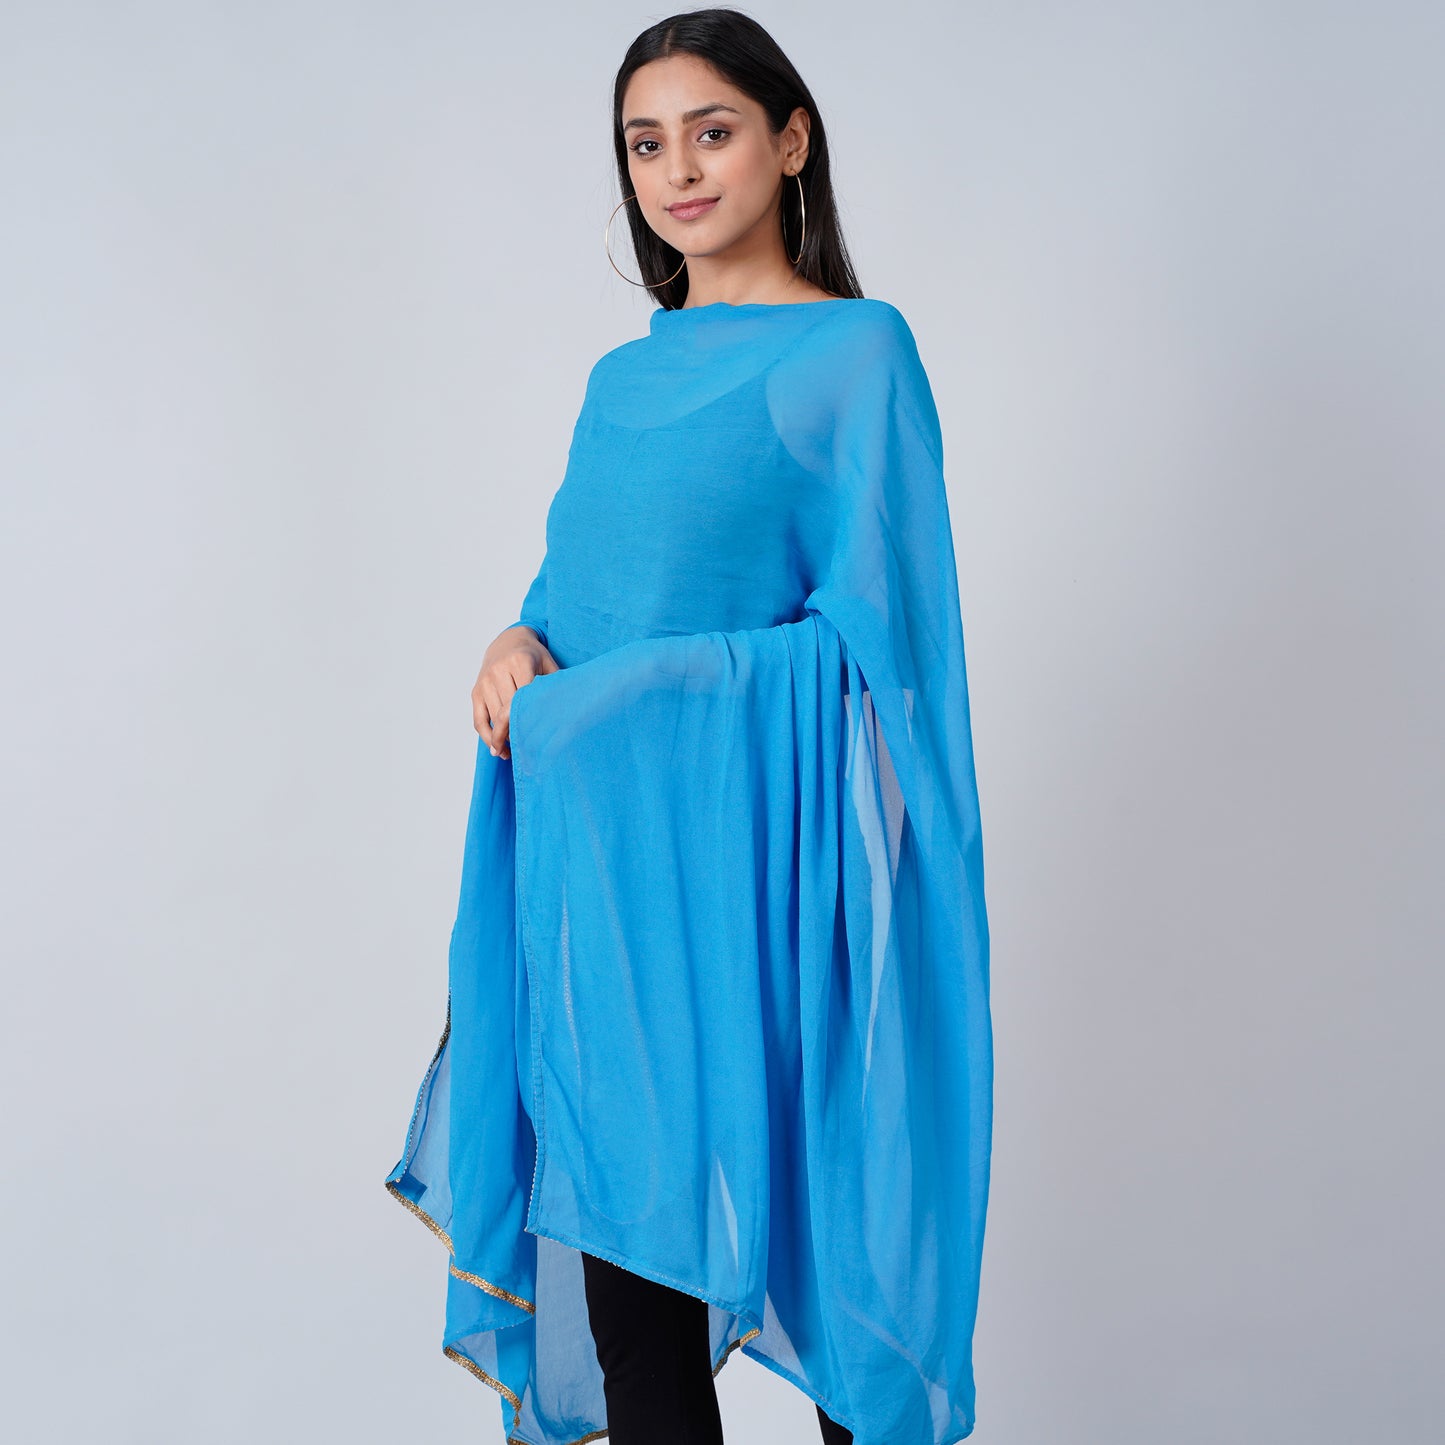 Hot Pink and Blue Paisley Tunic with Tulip Pants and Dupatta Set